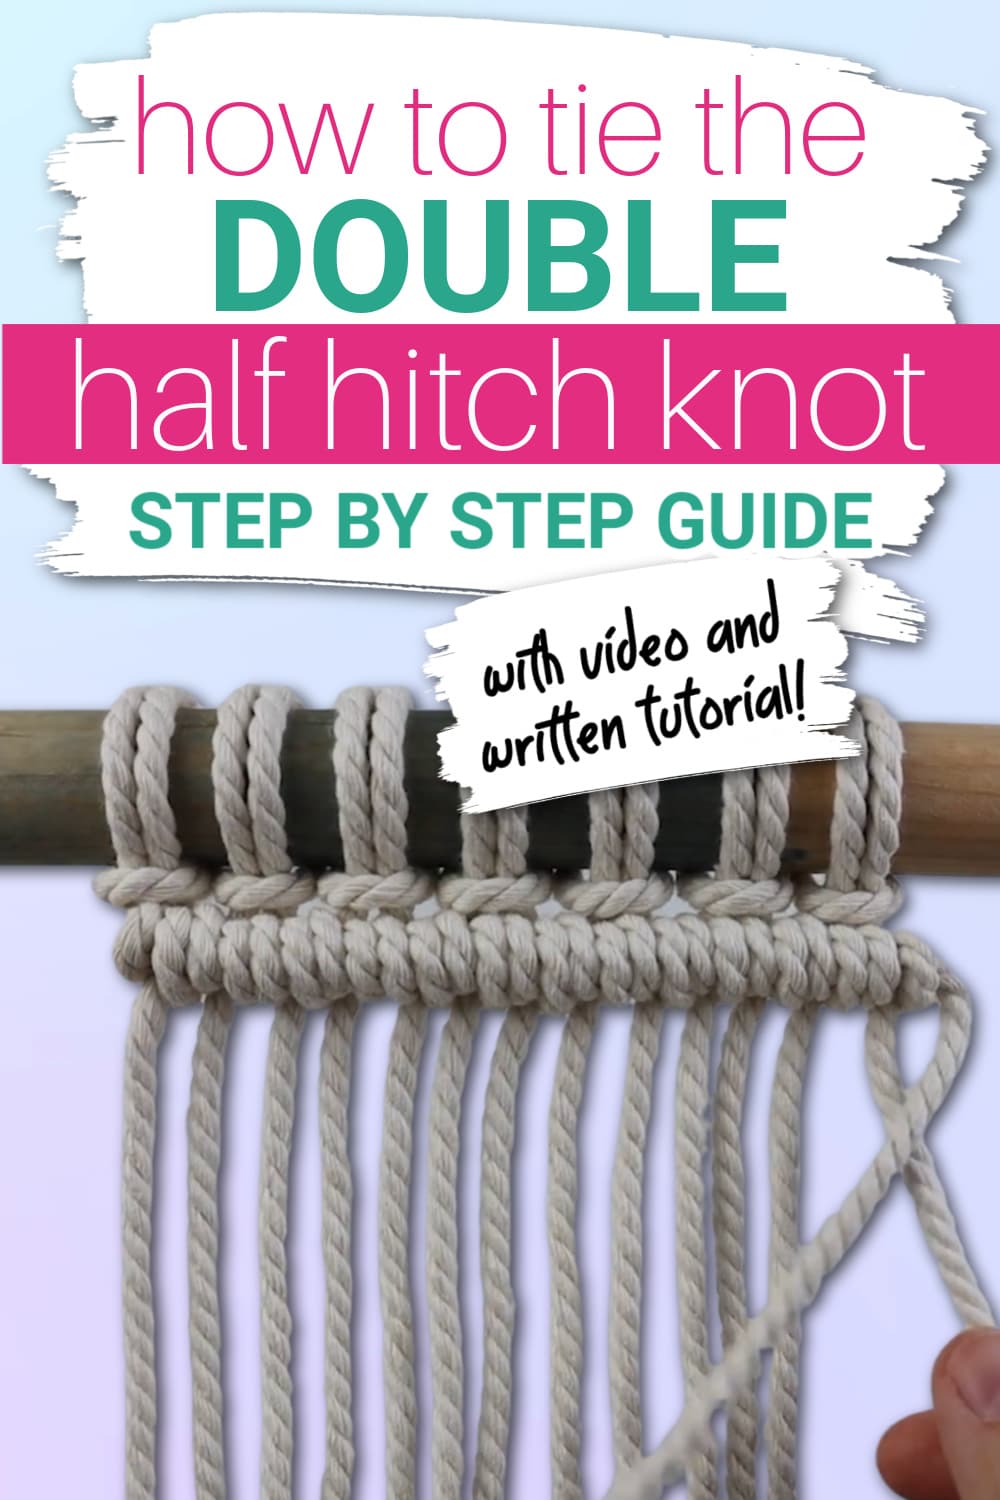 How to Tie a Double Half Hitch Knot (for Macrame)